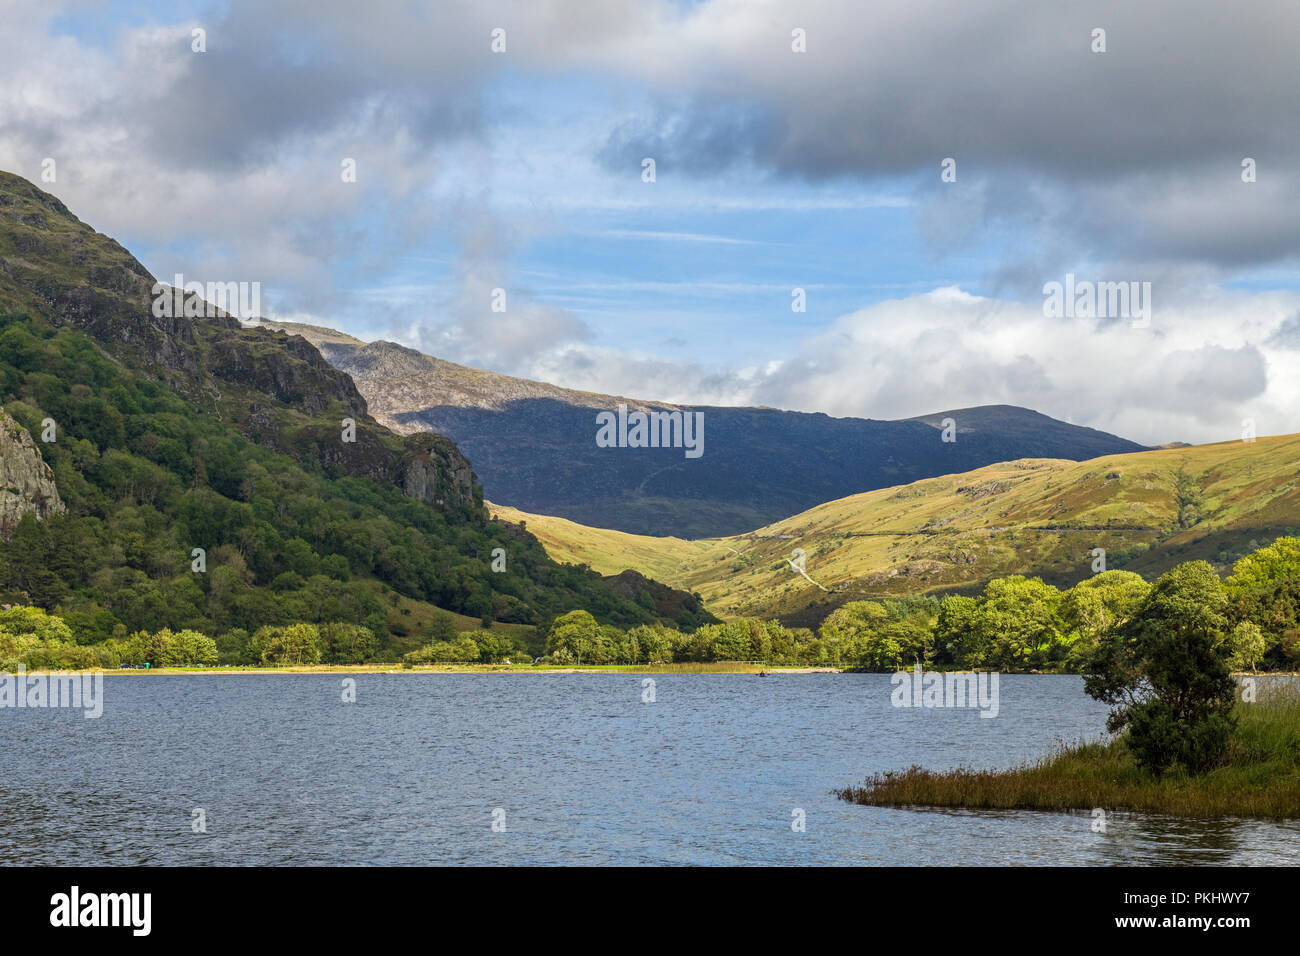 Llyn Gwynant, a beautiful lake in the Nant Gwynant valley in Snowdonia, North Wales, photographed on a sunny September morning Stock Photo